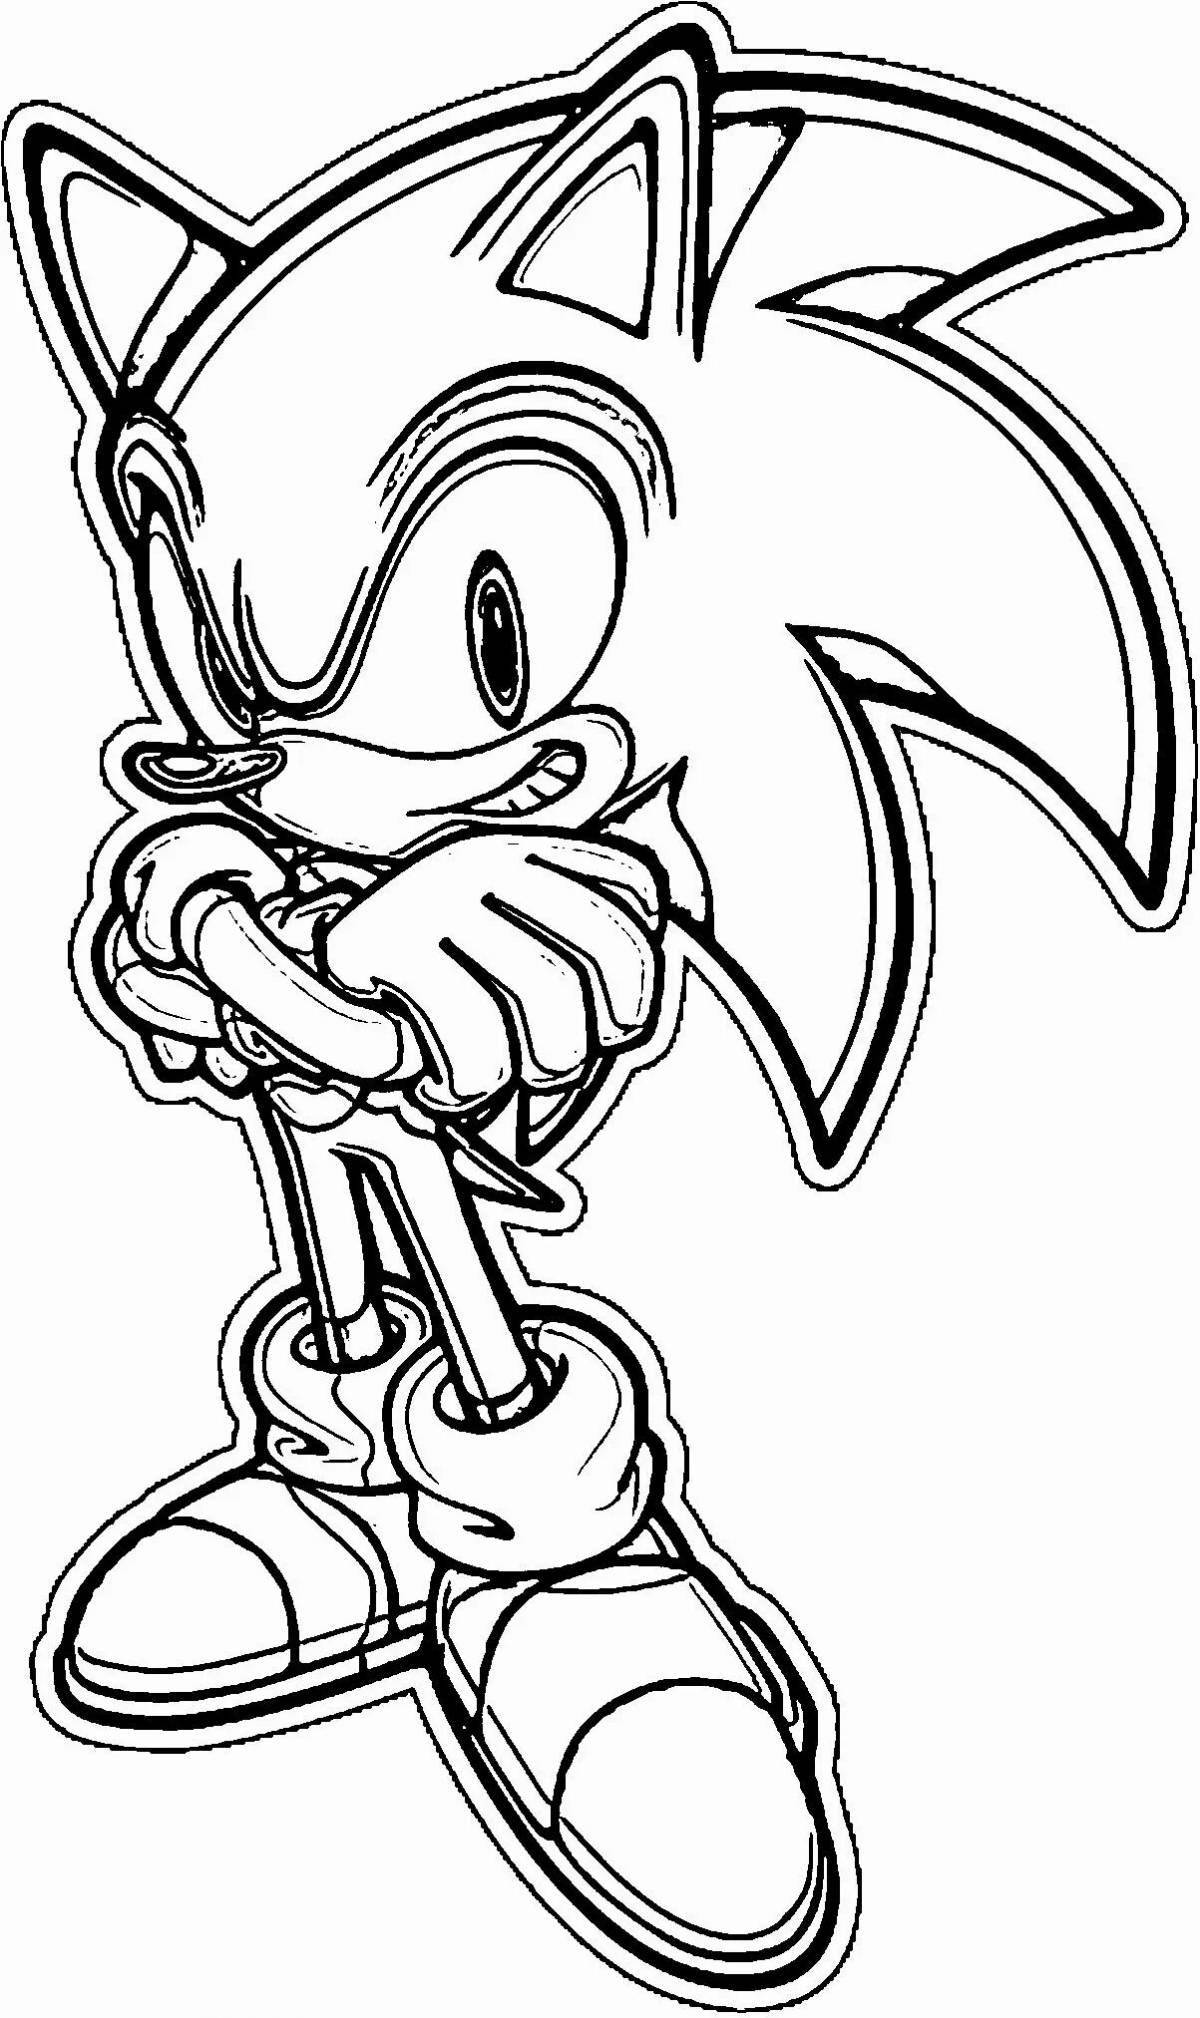 Hyper sonic coloring page